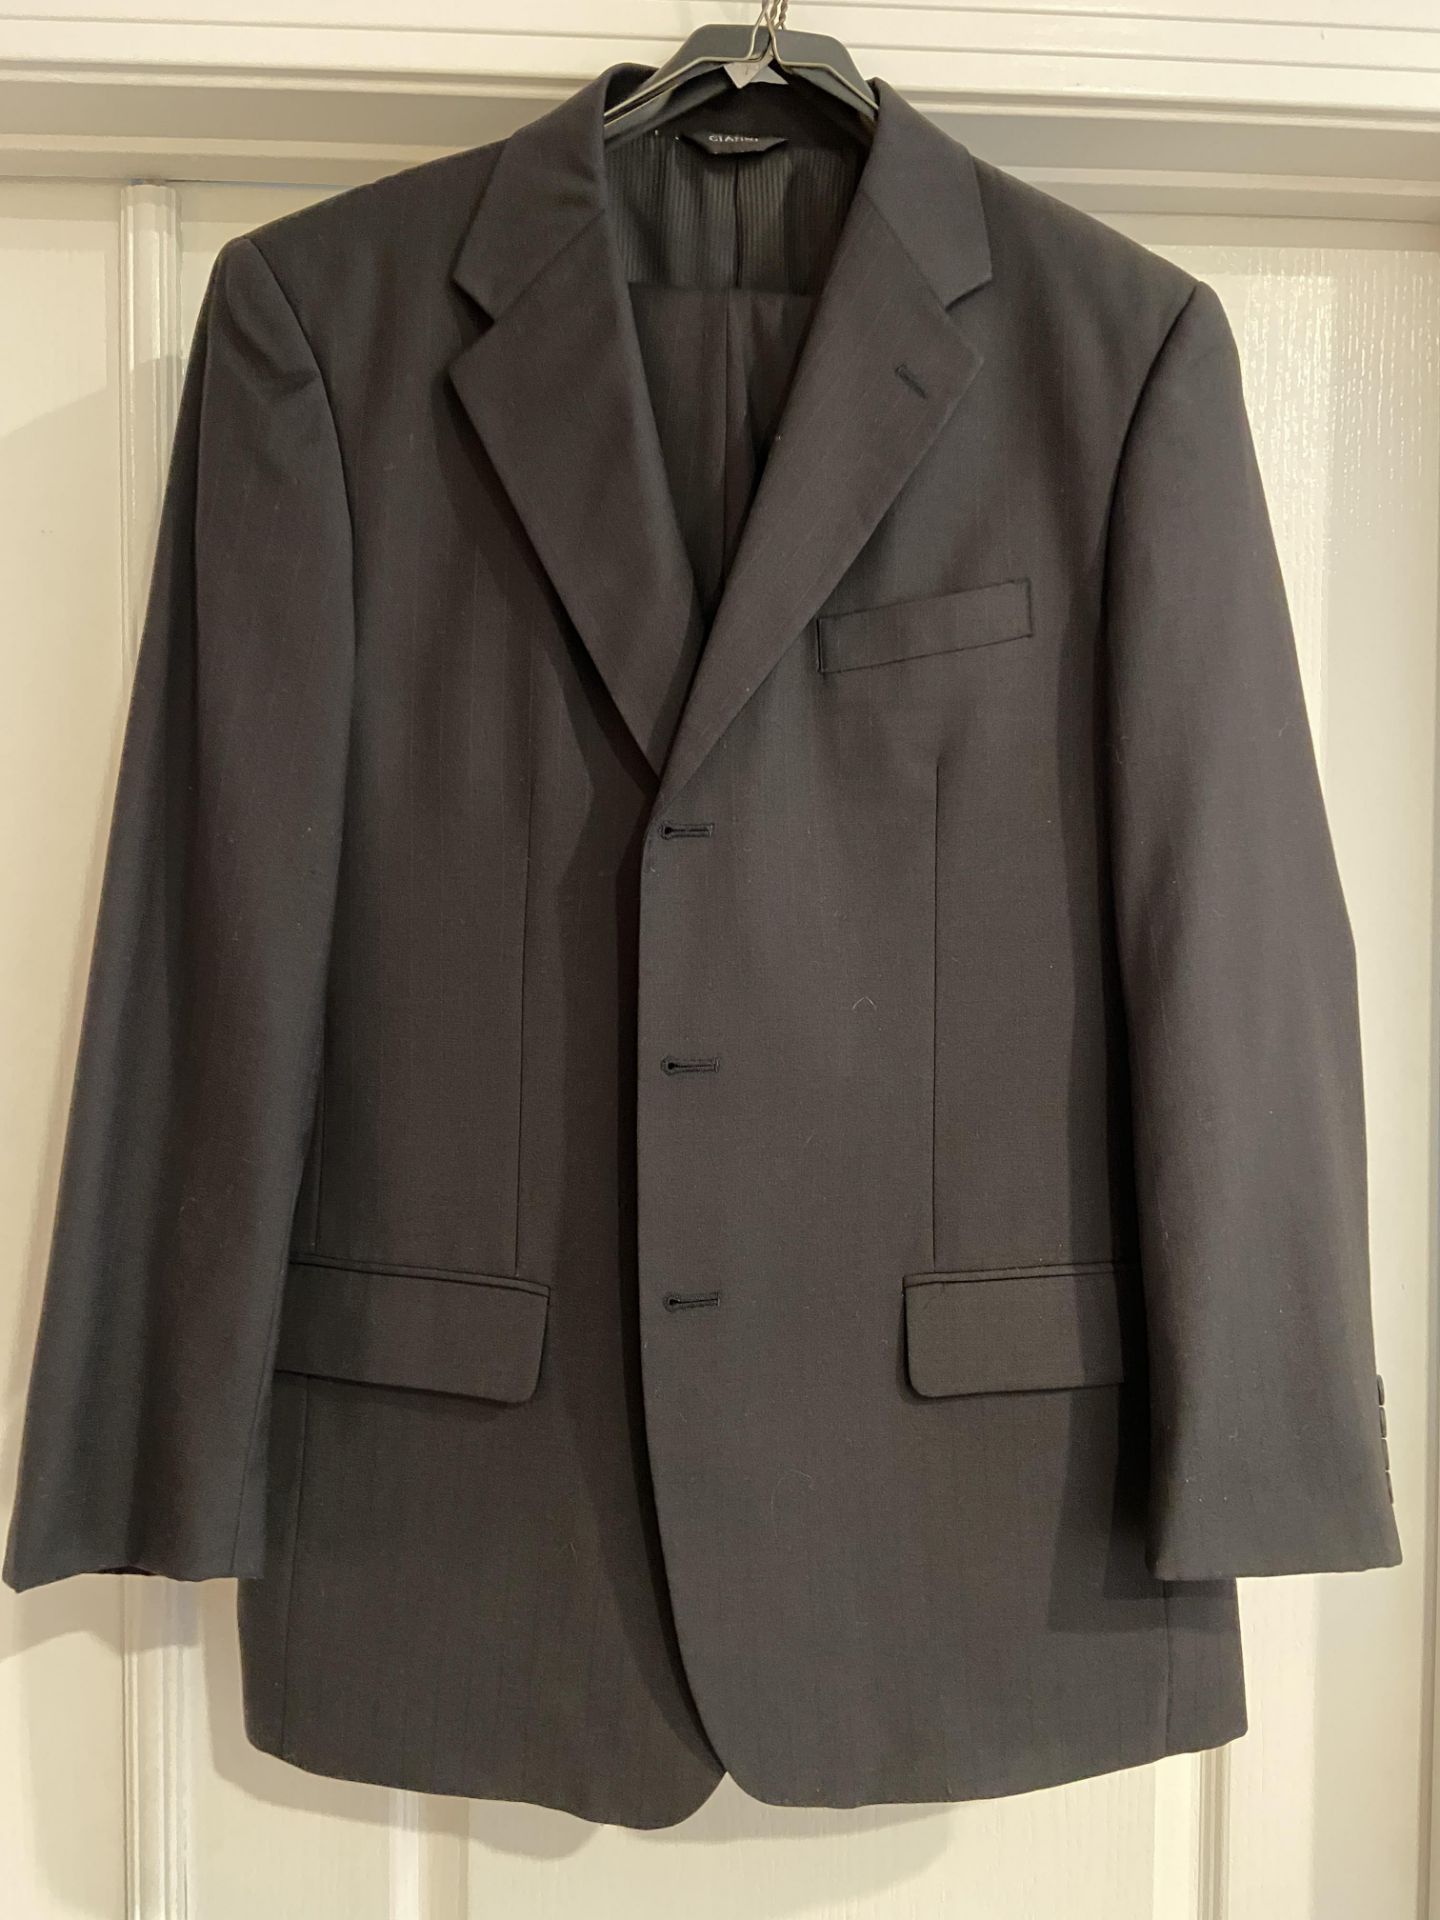 Collection of High End Men's Clothing: 6 Suits Size 42R, 1 Sport Jacket Size 42R, 1 Polo XL - Image 14 of 18